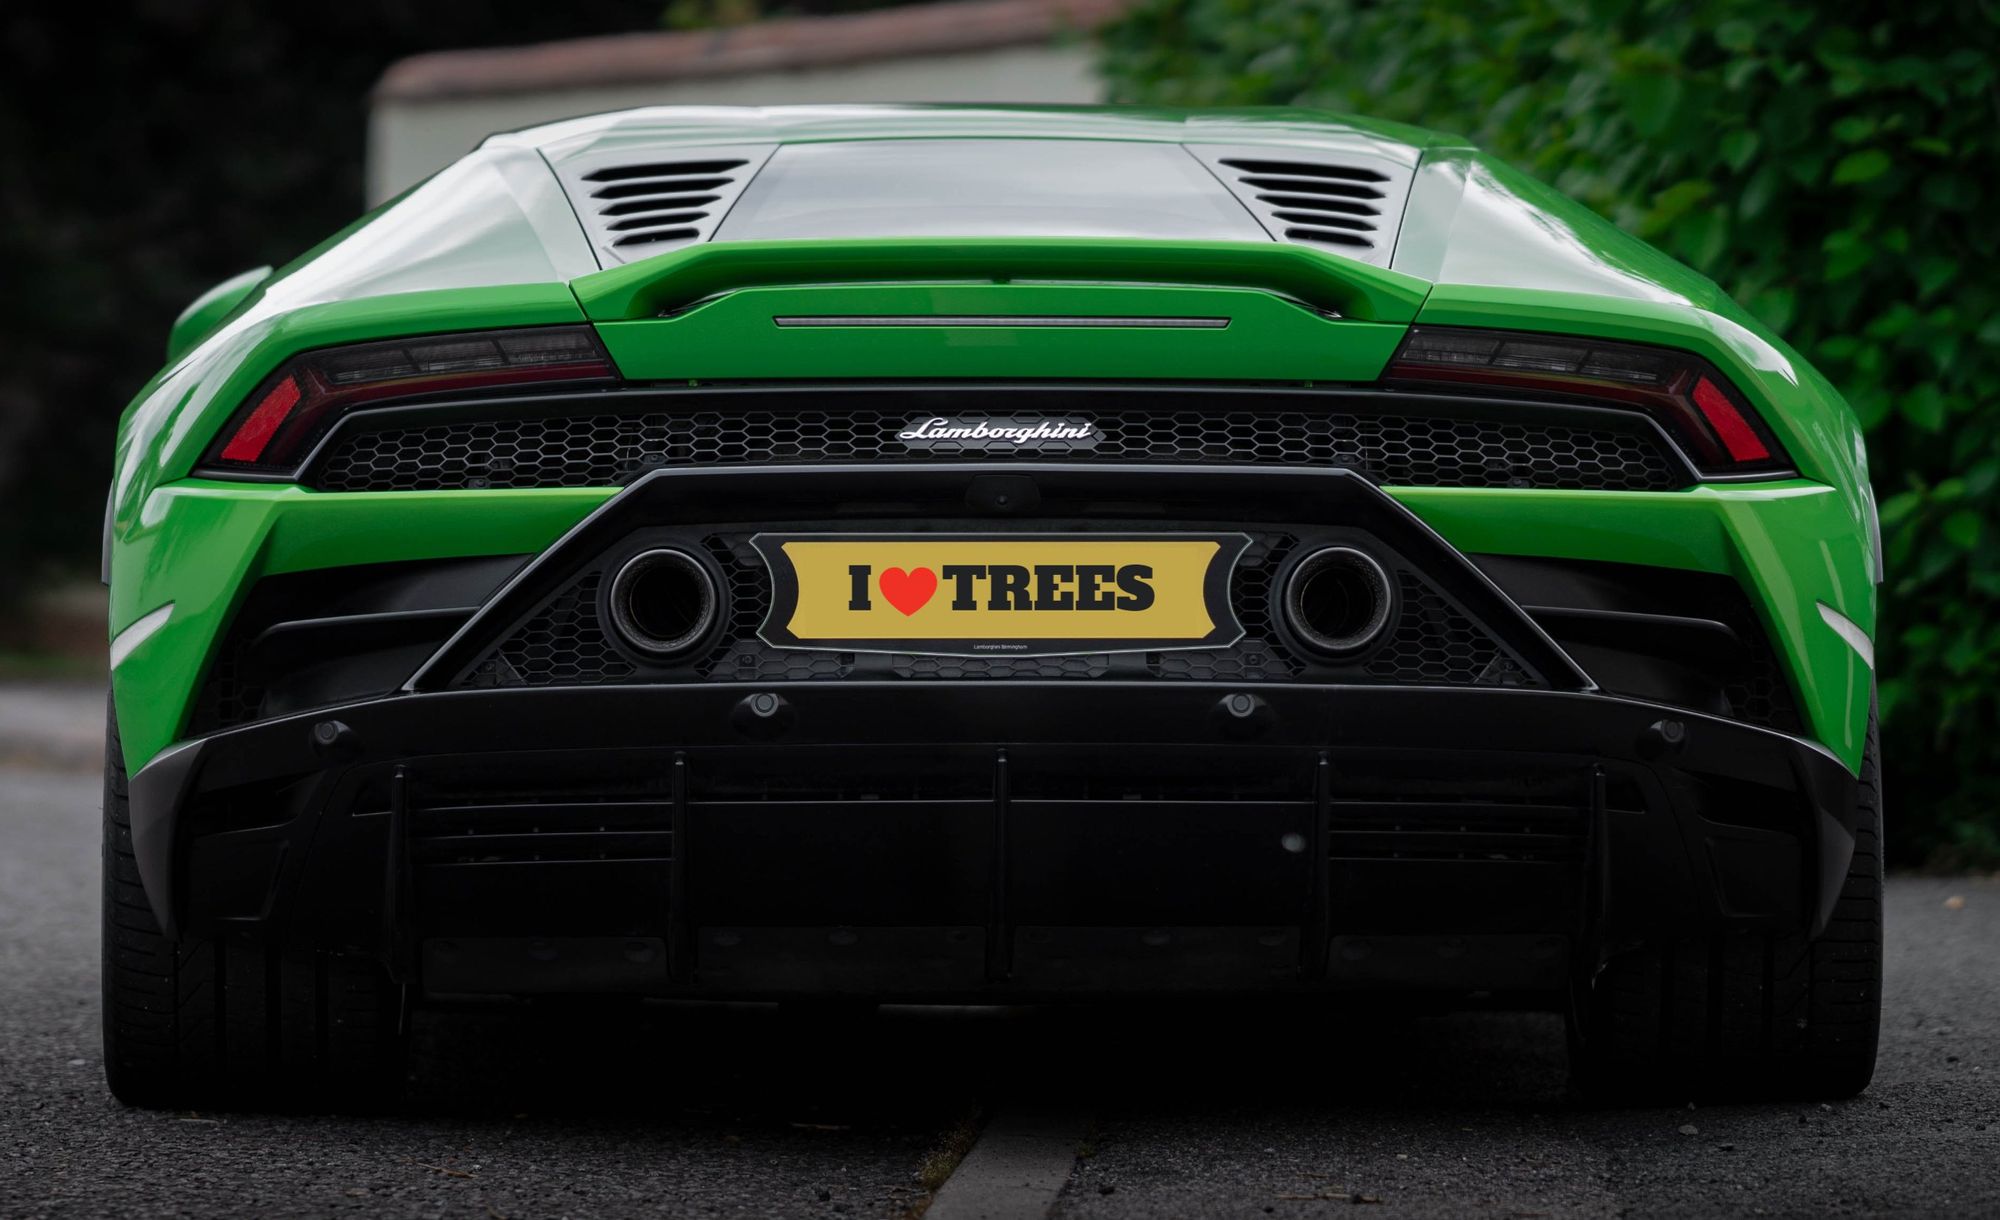 Green Lamborghini with a number plate that says "I love trees".